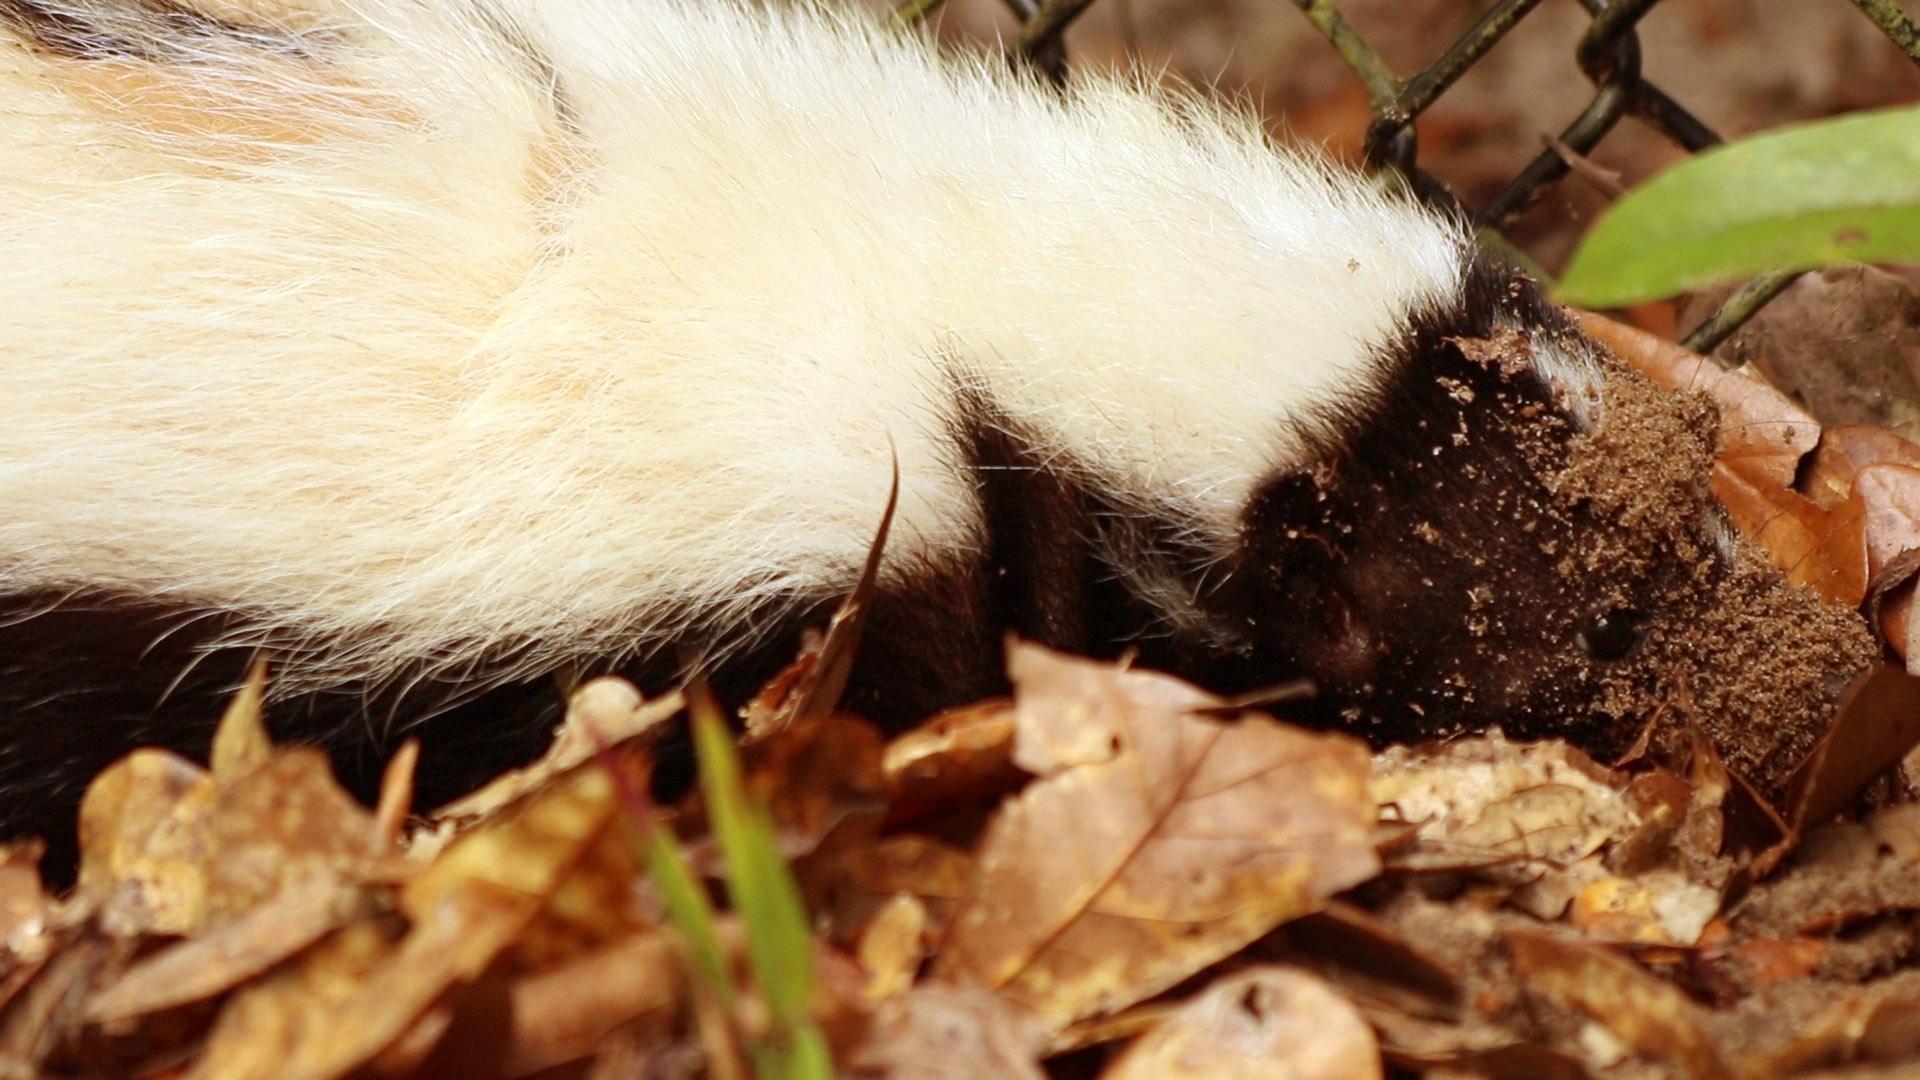 Striped Skunks |Tallahassee Museum’s Mysterious Residents